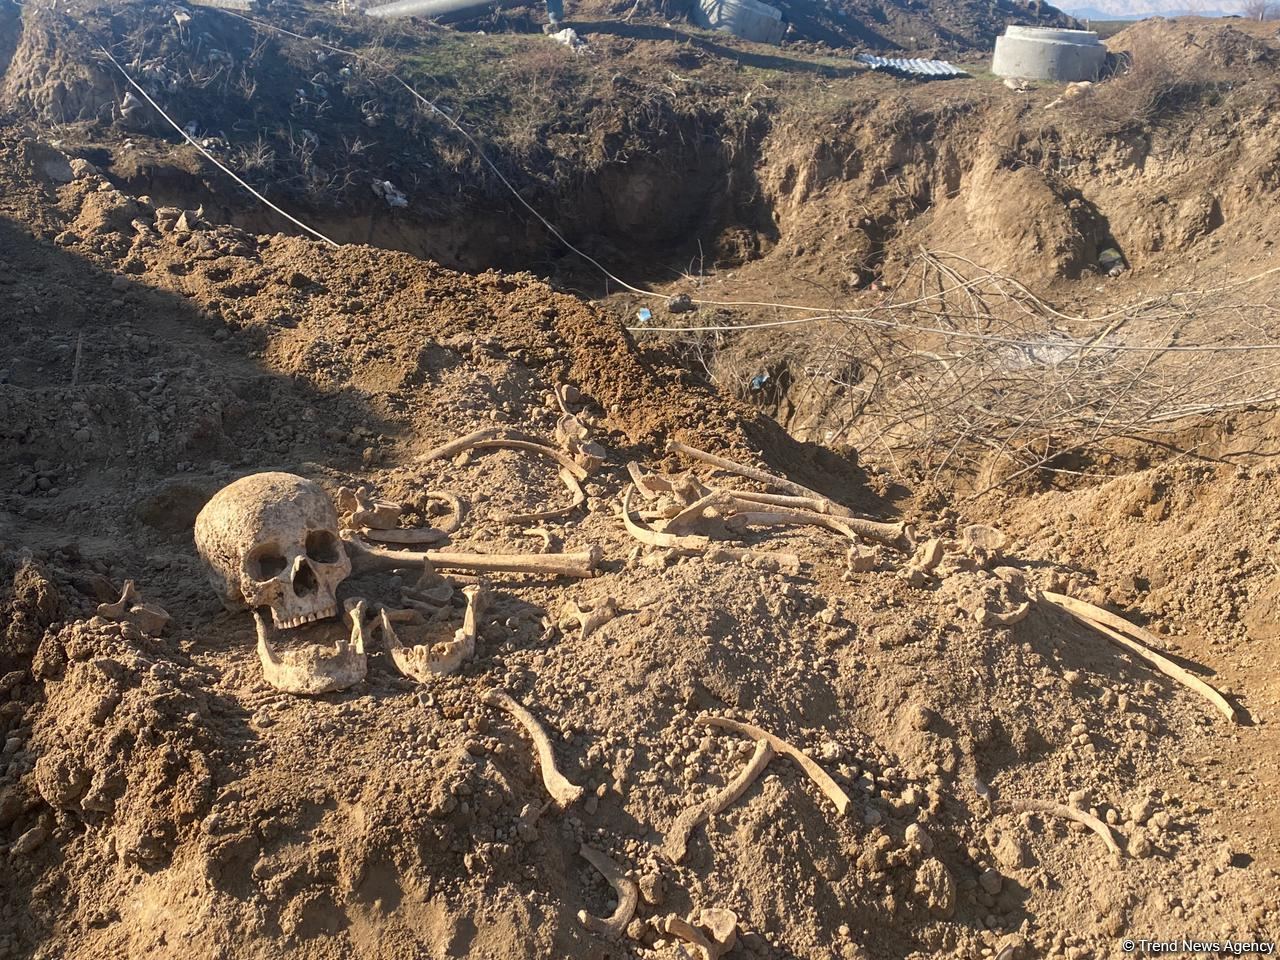 Fragments of human skeleton found in Azerbaijani Aghdam's water canal - Trend TV